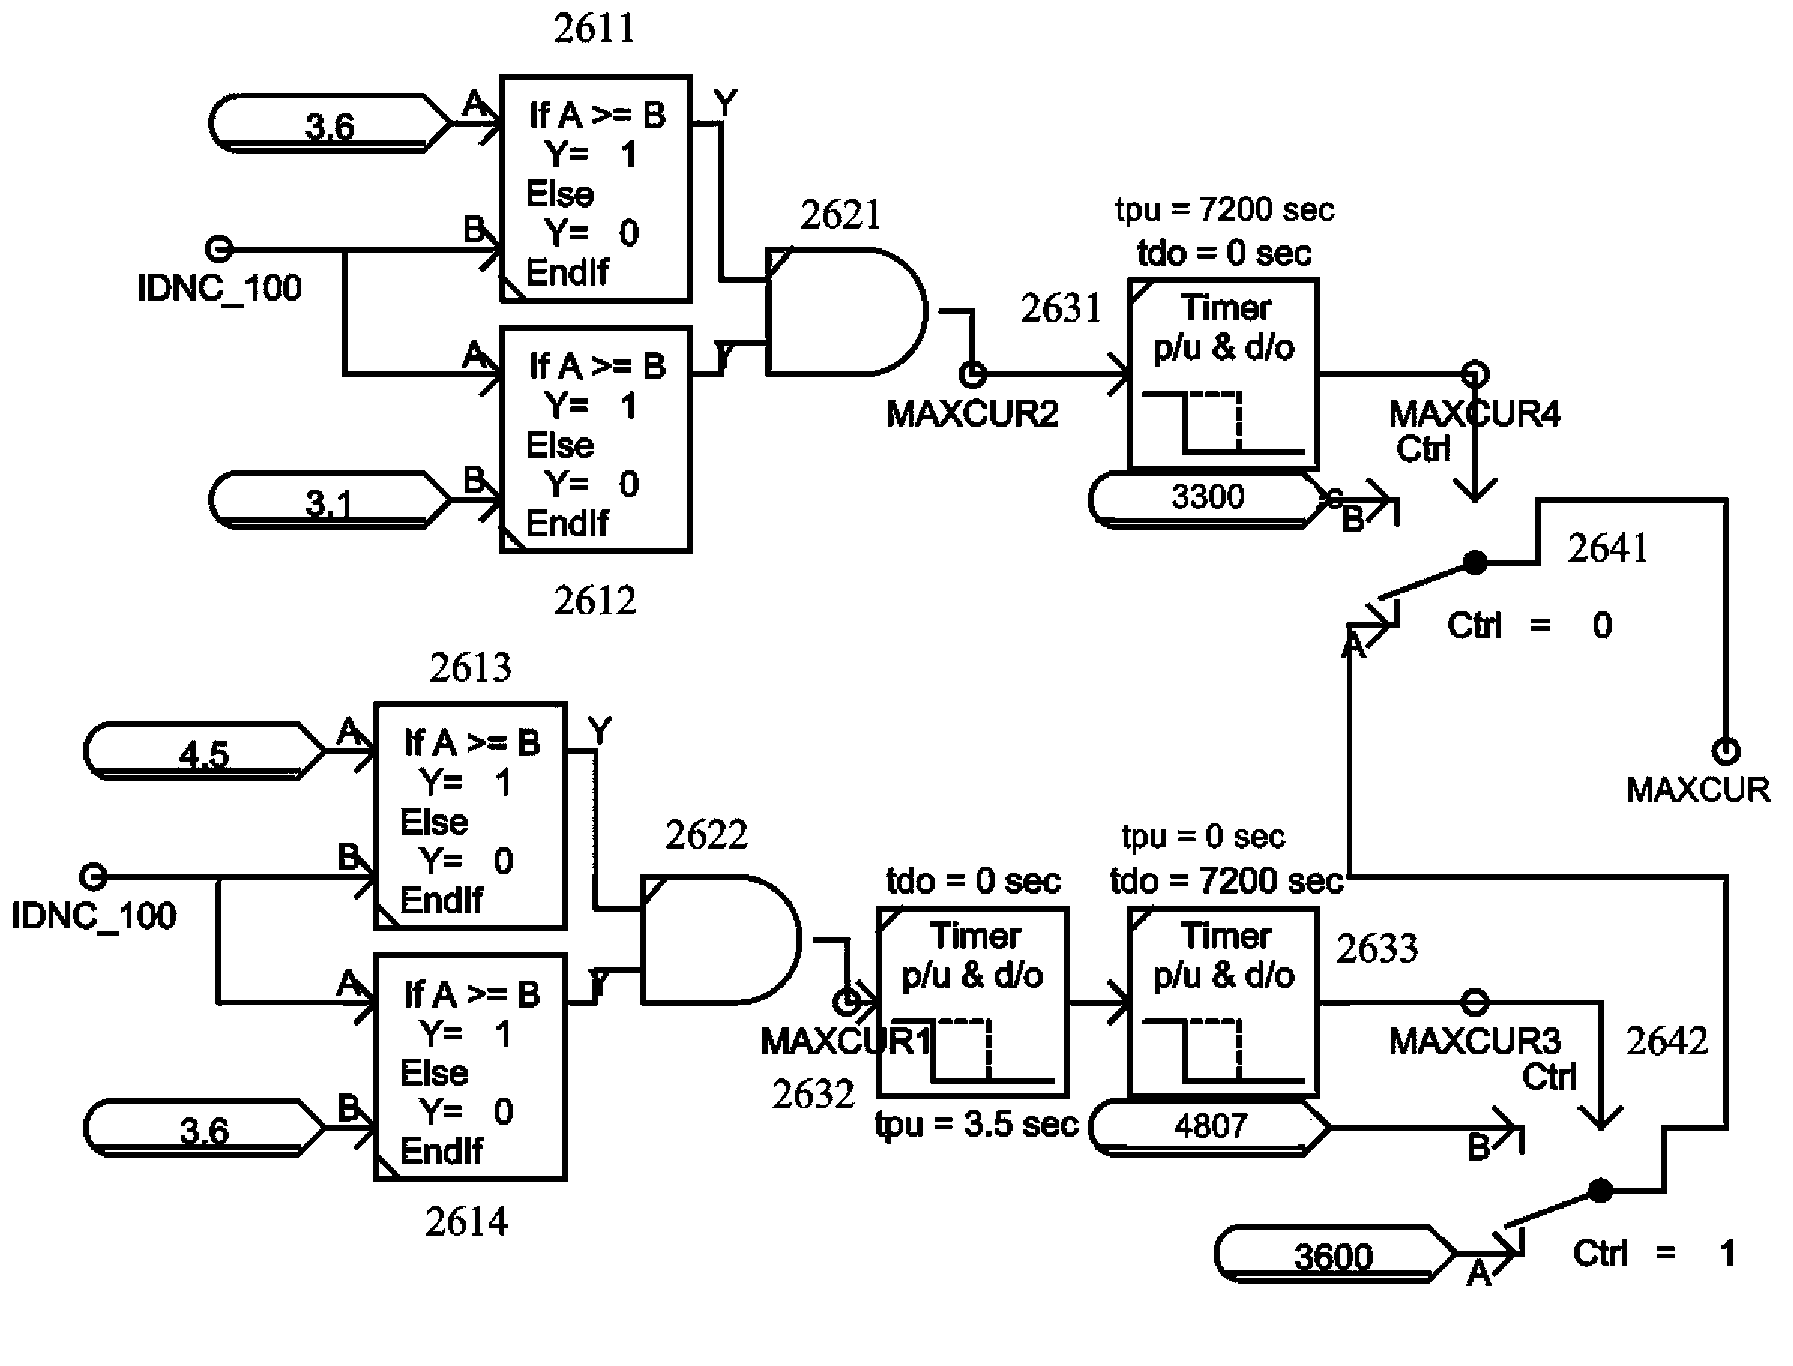 Direct-current control protection simulation device based on RTDS